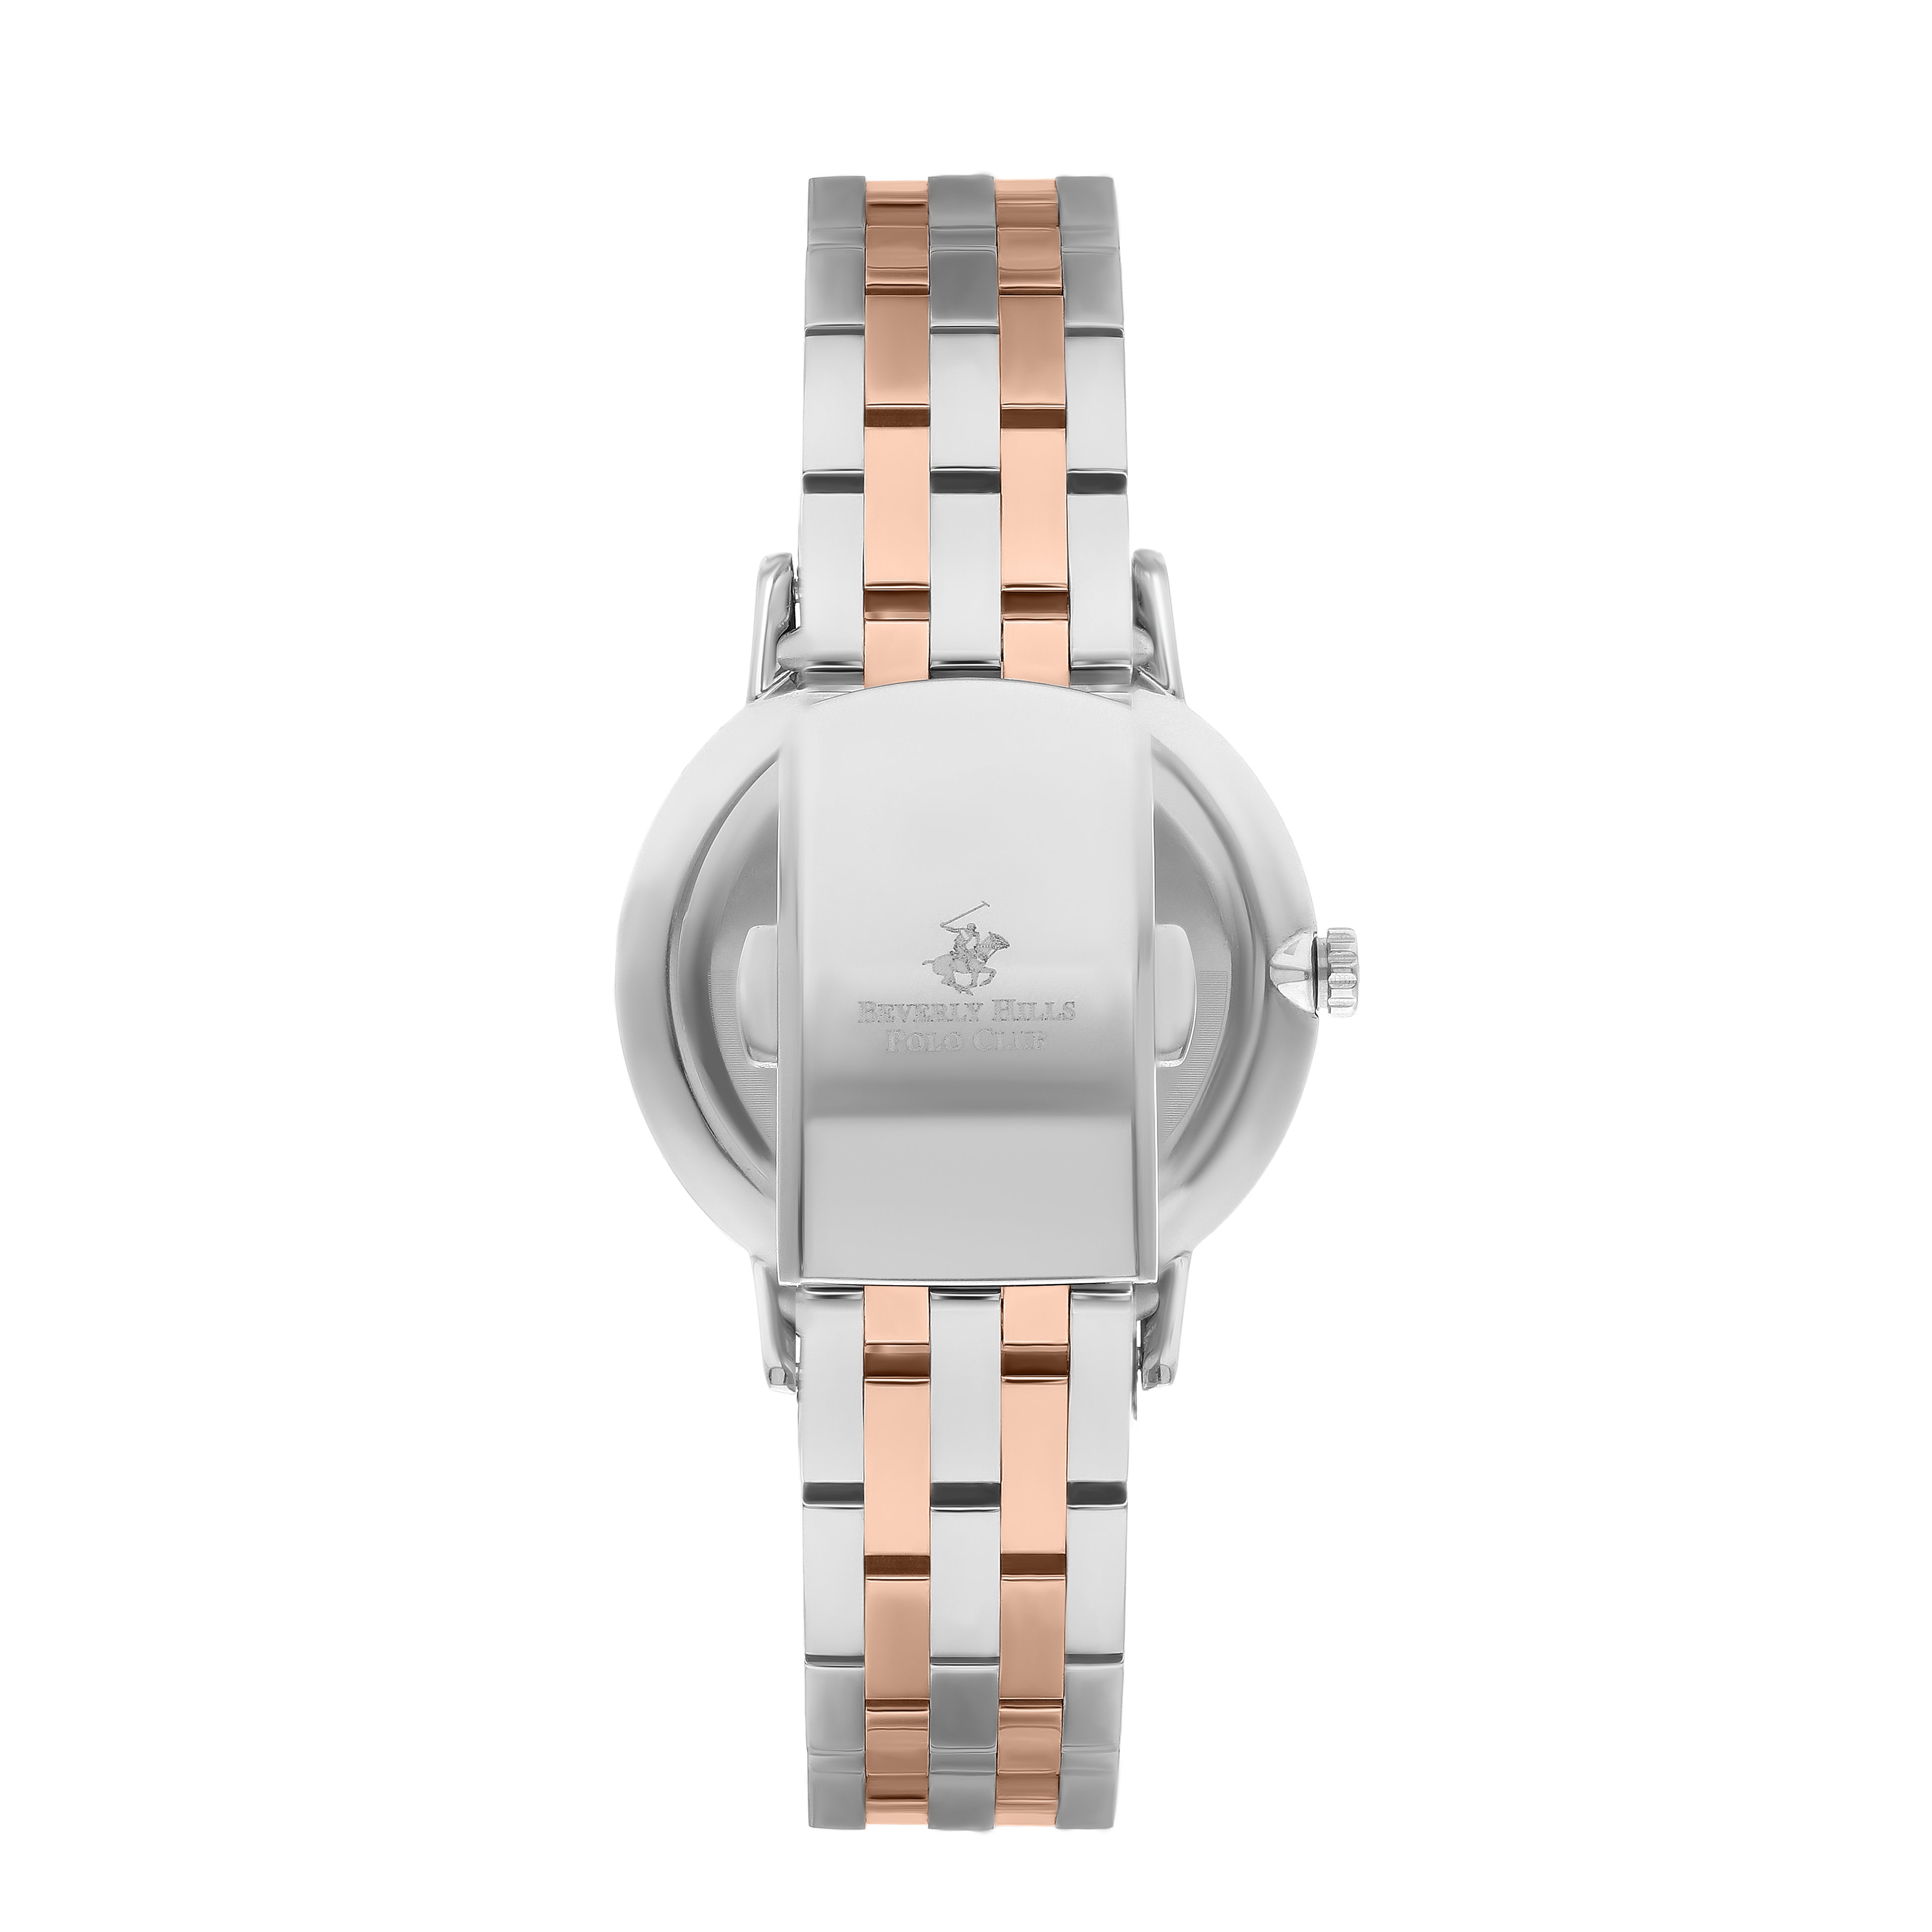 Polo - BP3289X.530 - Ladies Stainless Steel Watch